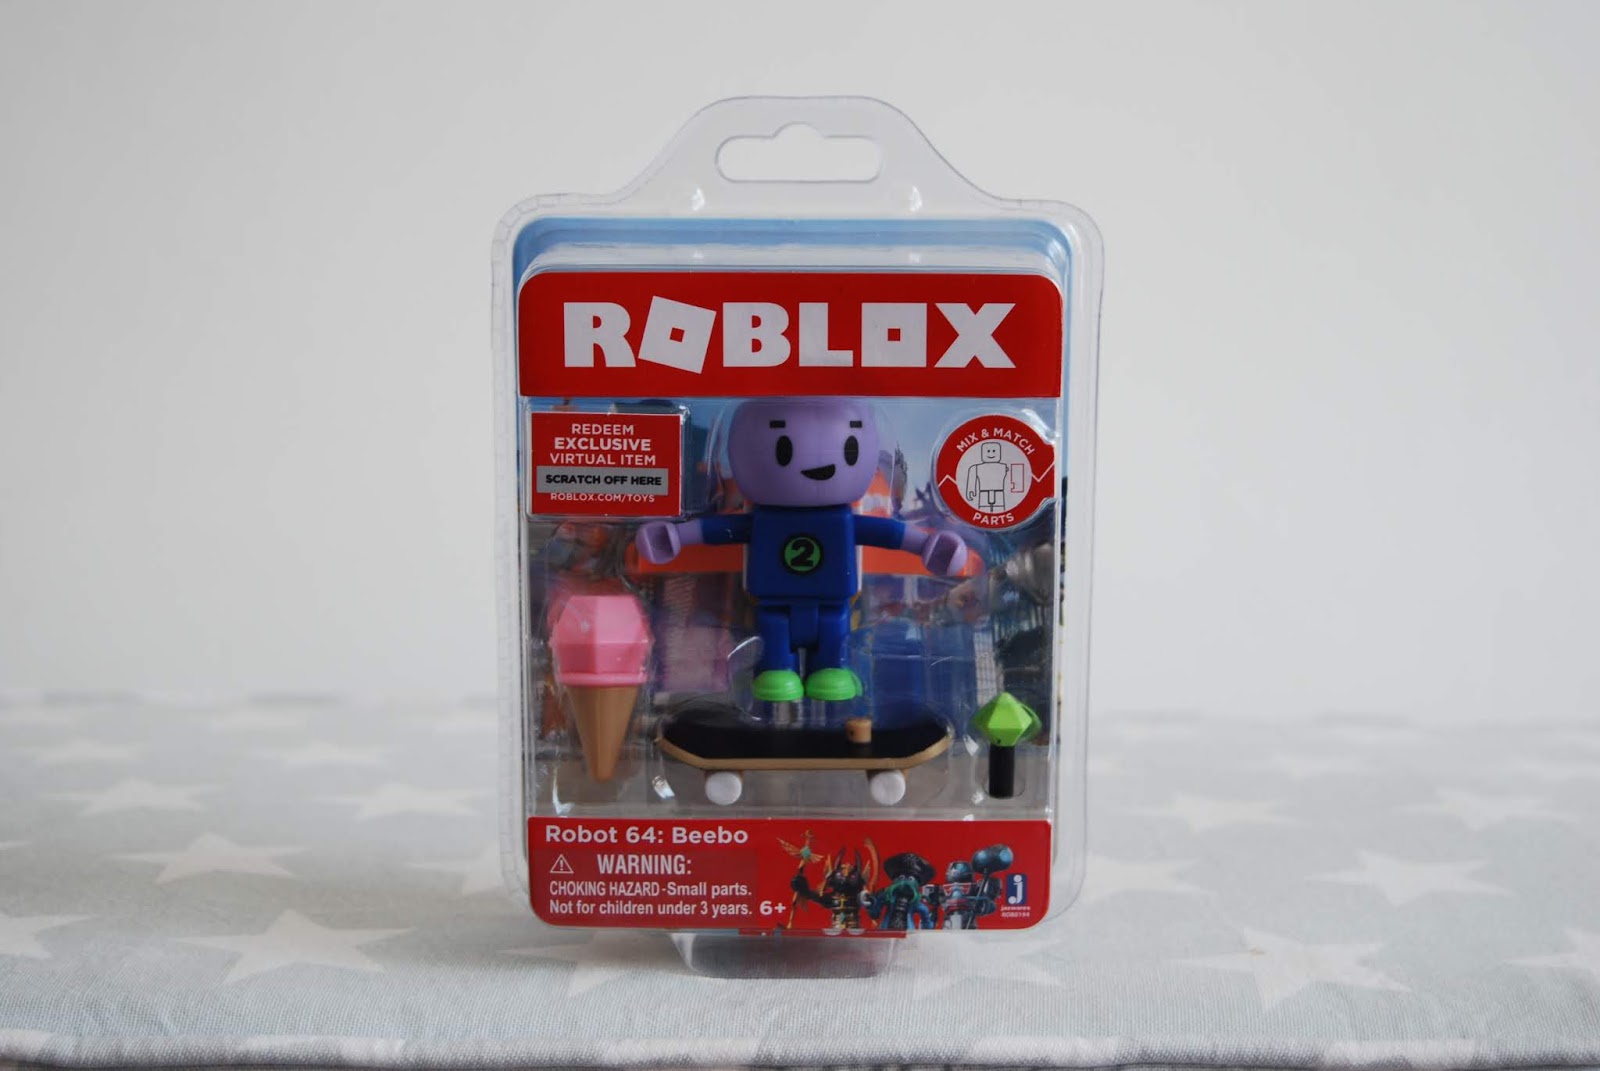 Chic Geek Diary Roblox Series 5 Toys Review Giveaway - 5 best roblox toys dec 2019 bestreviews